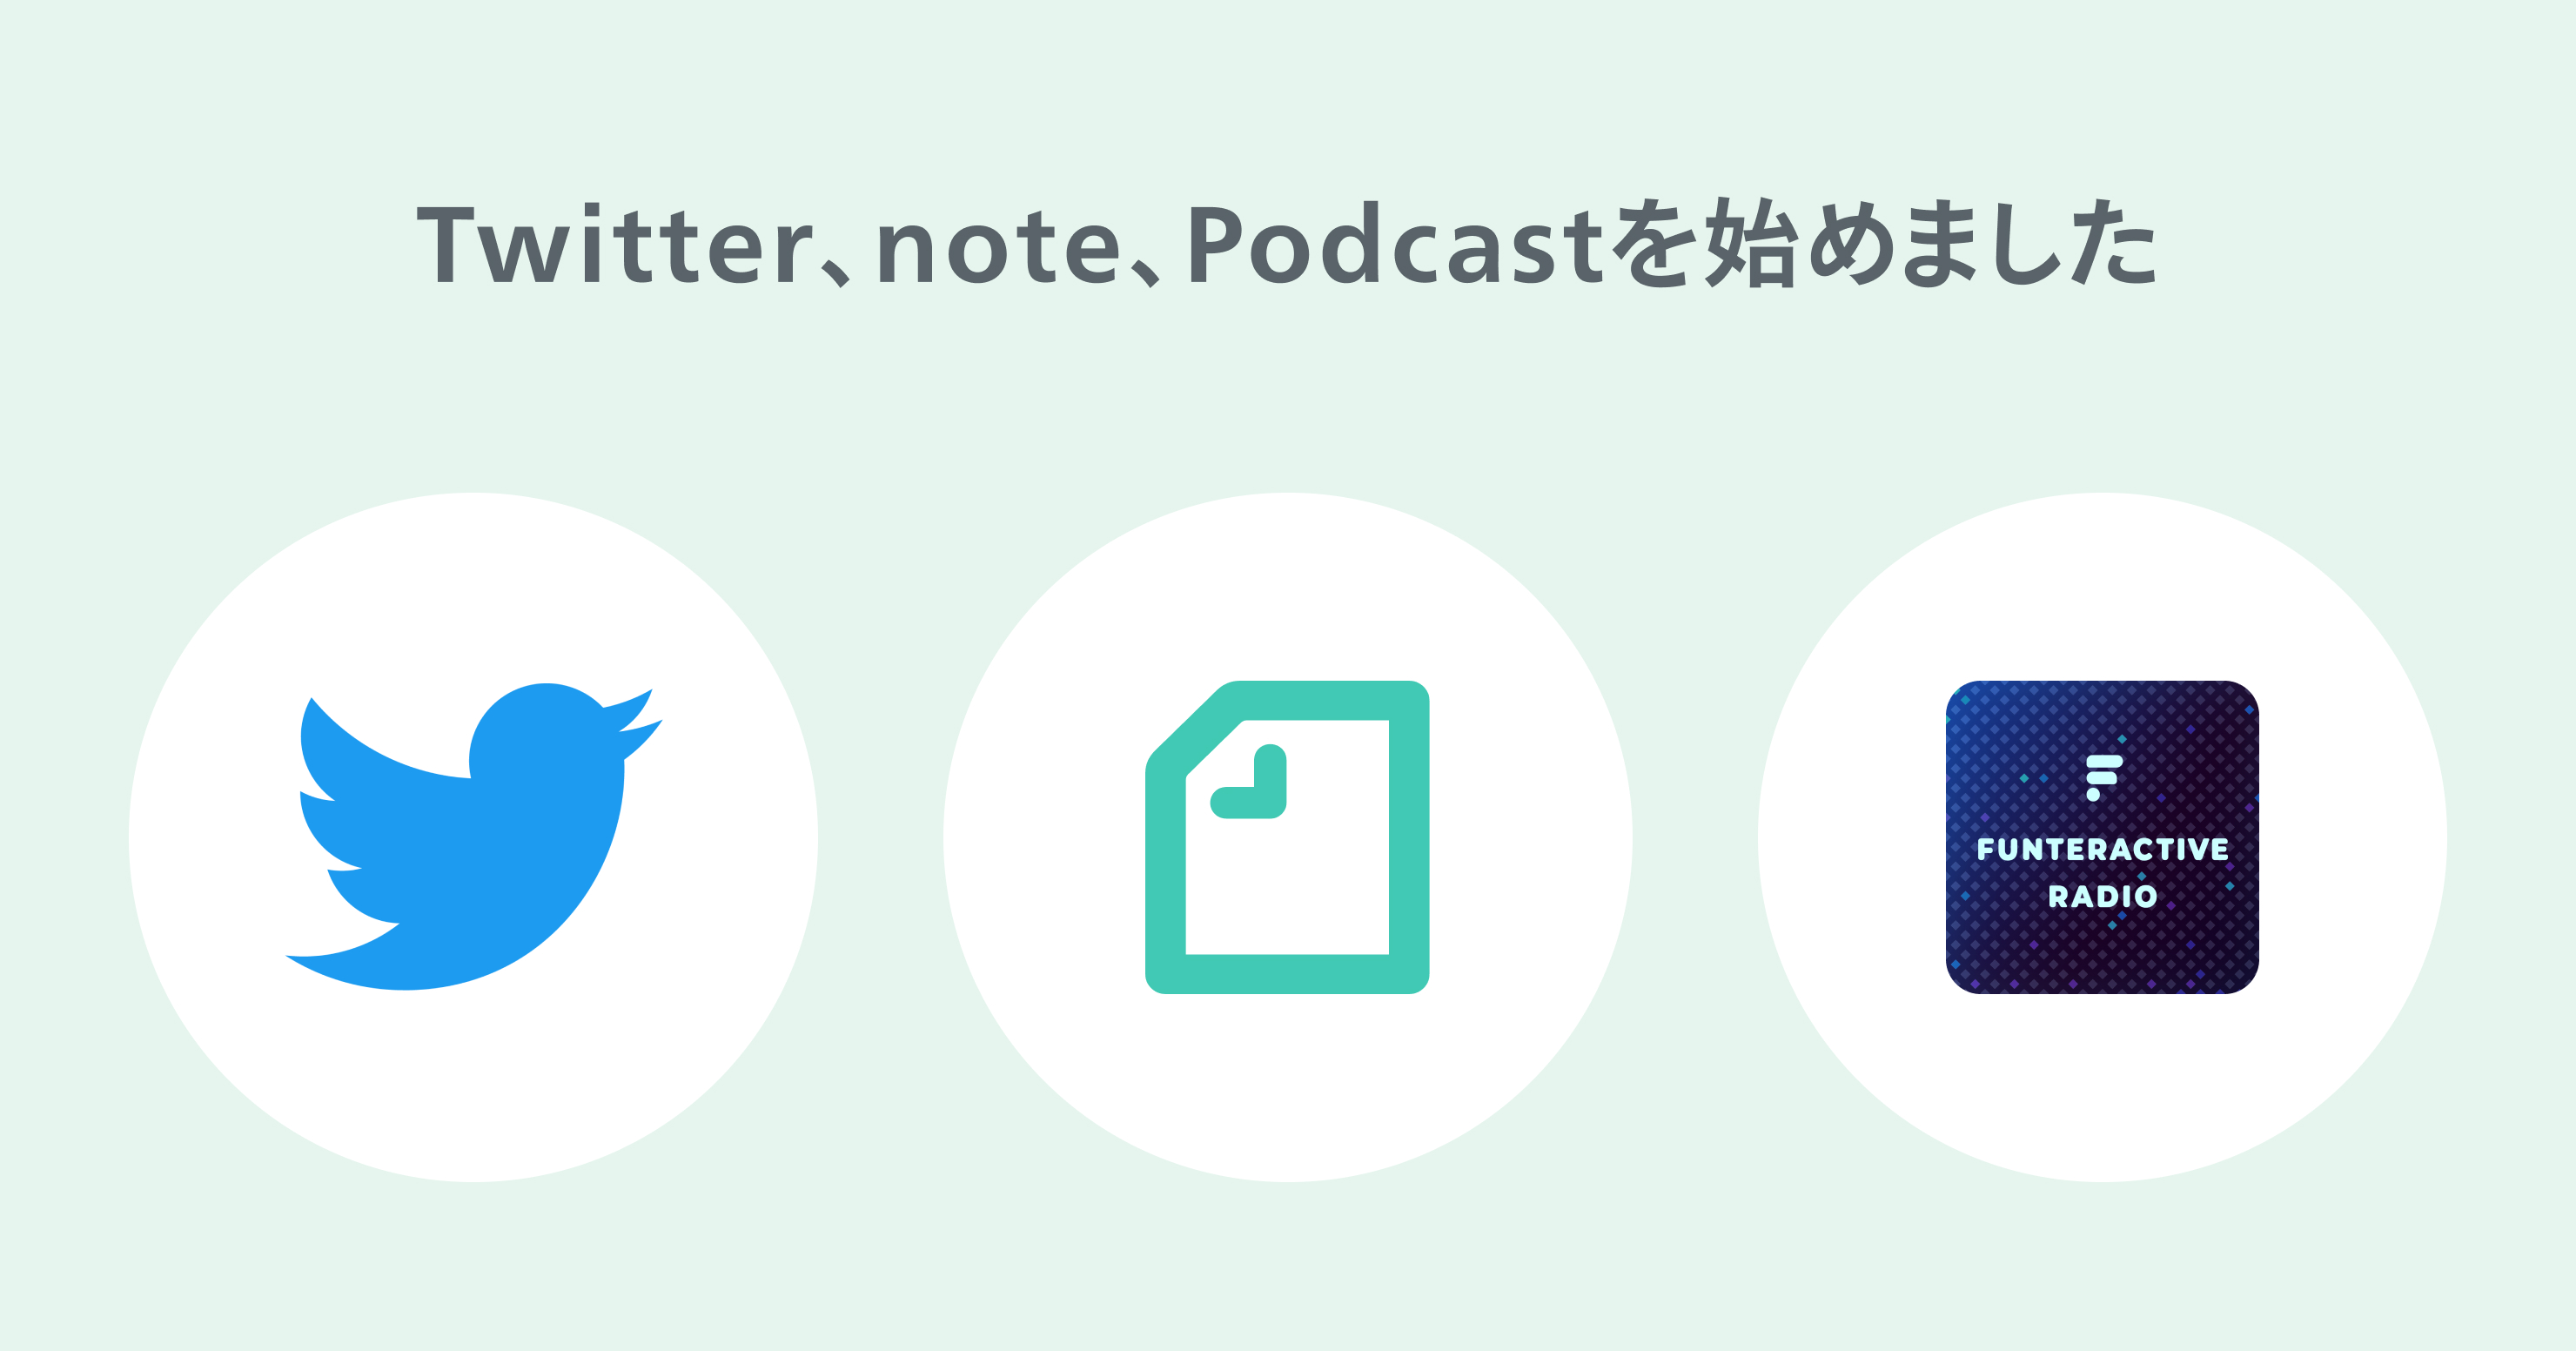 Twitter、note、Podcastを始めました